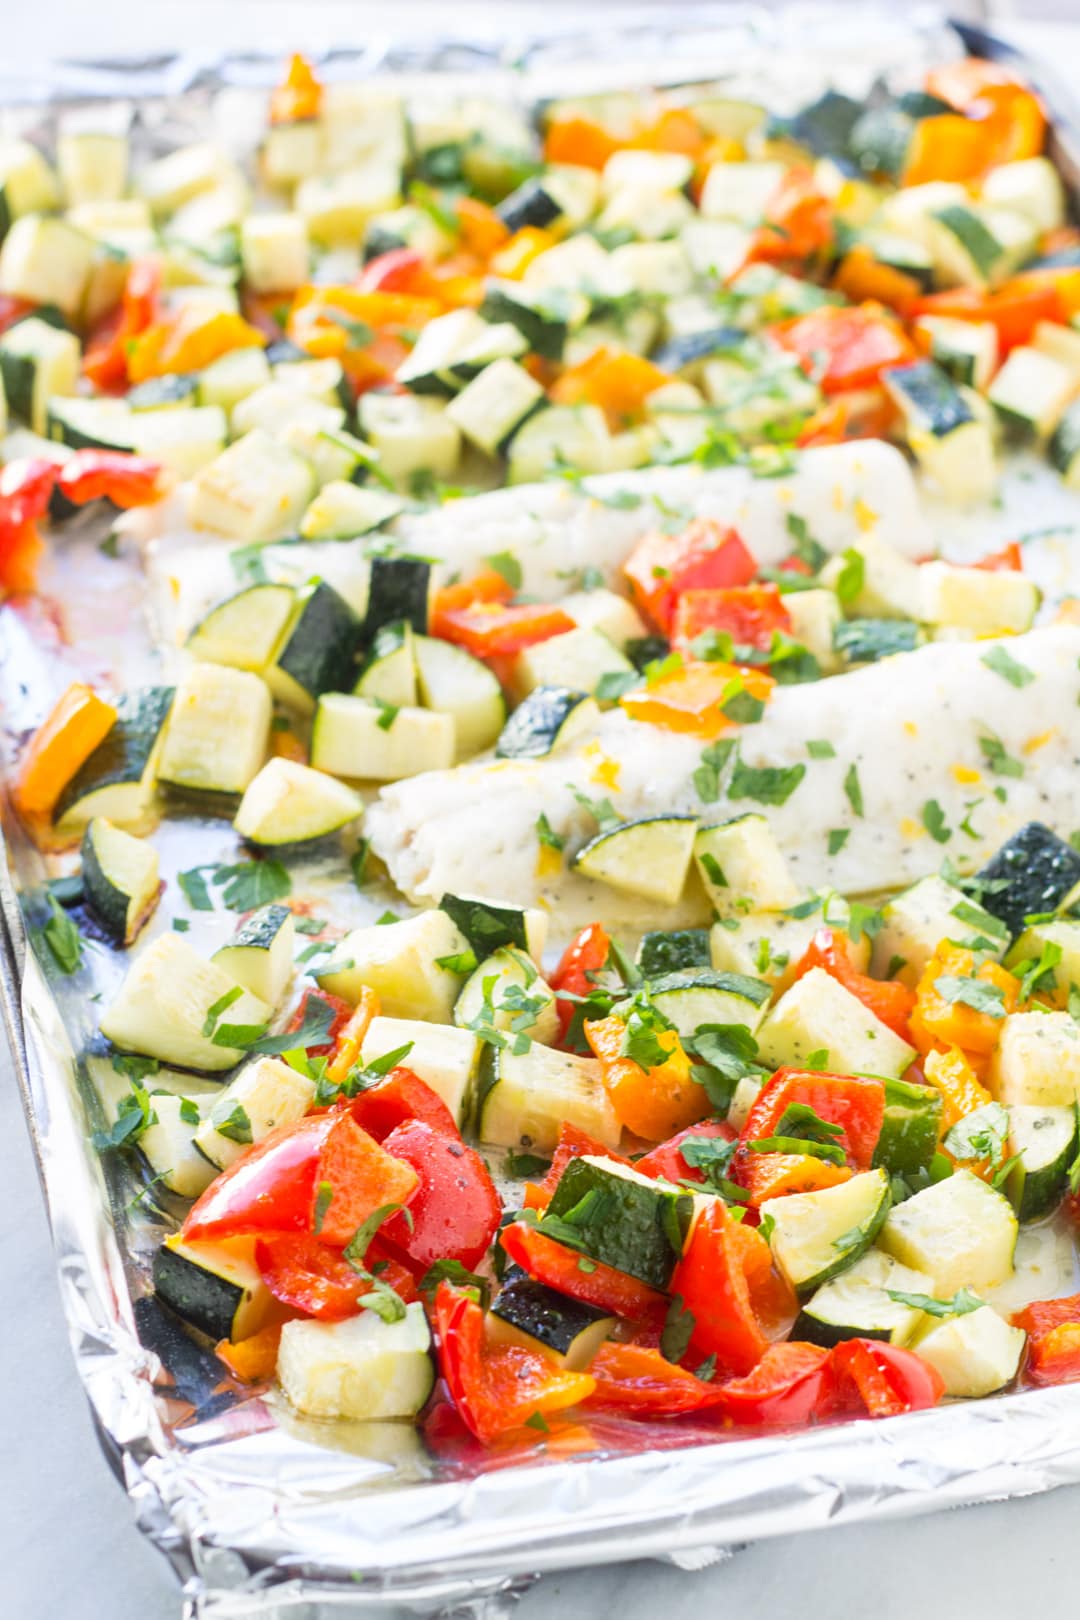 A sheet pan with baked cod, zucchini and bell peppers flavored with lemon and parsley.